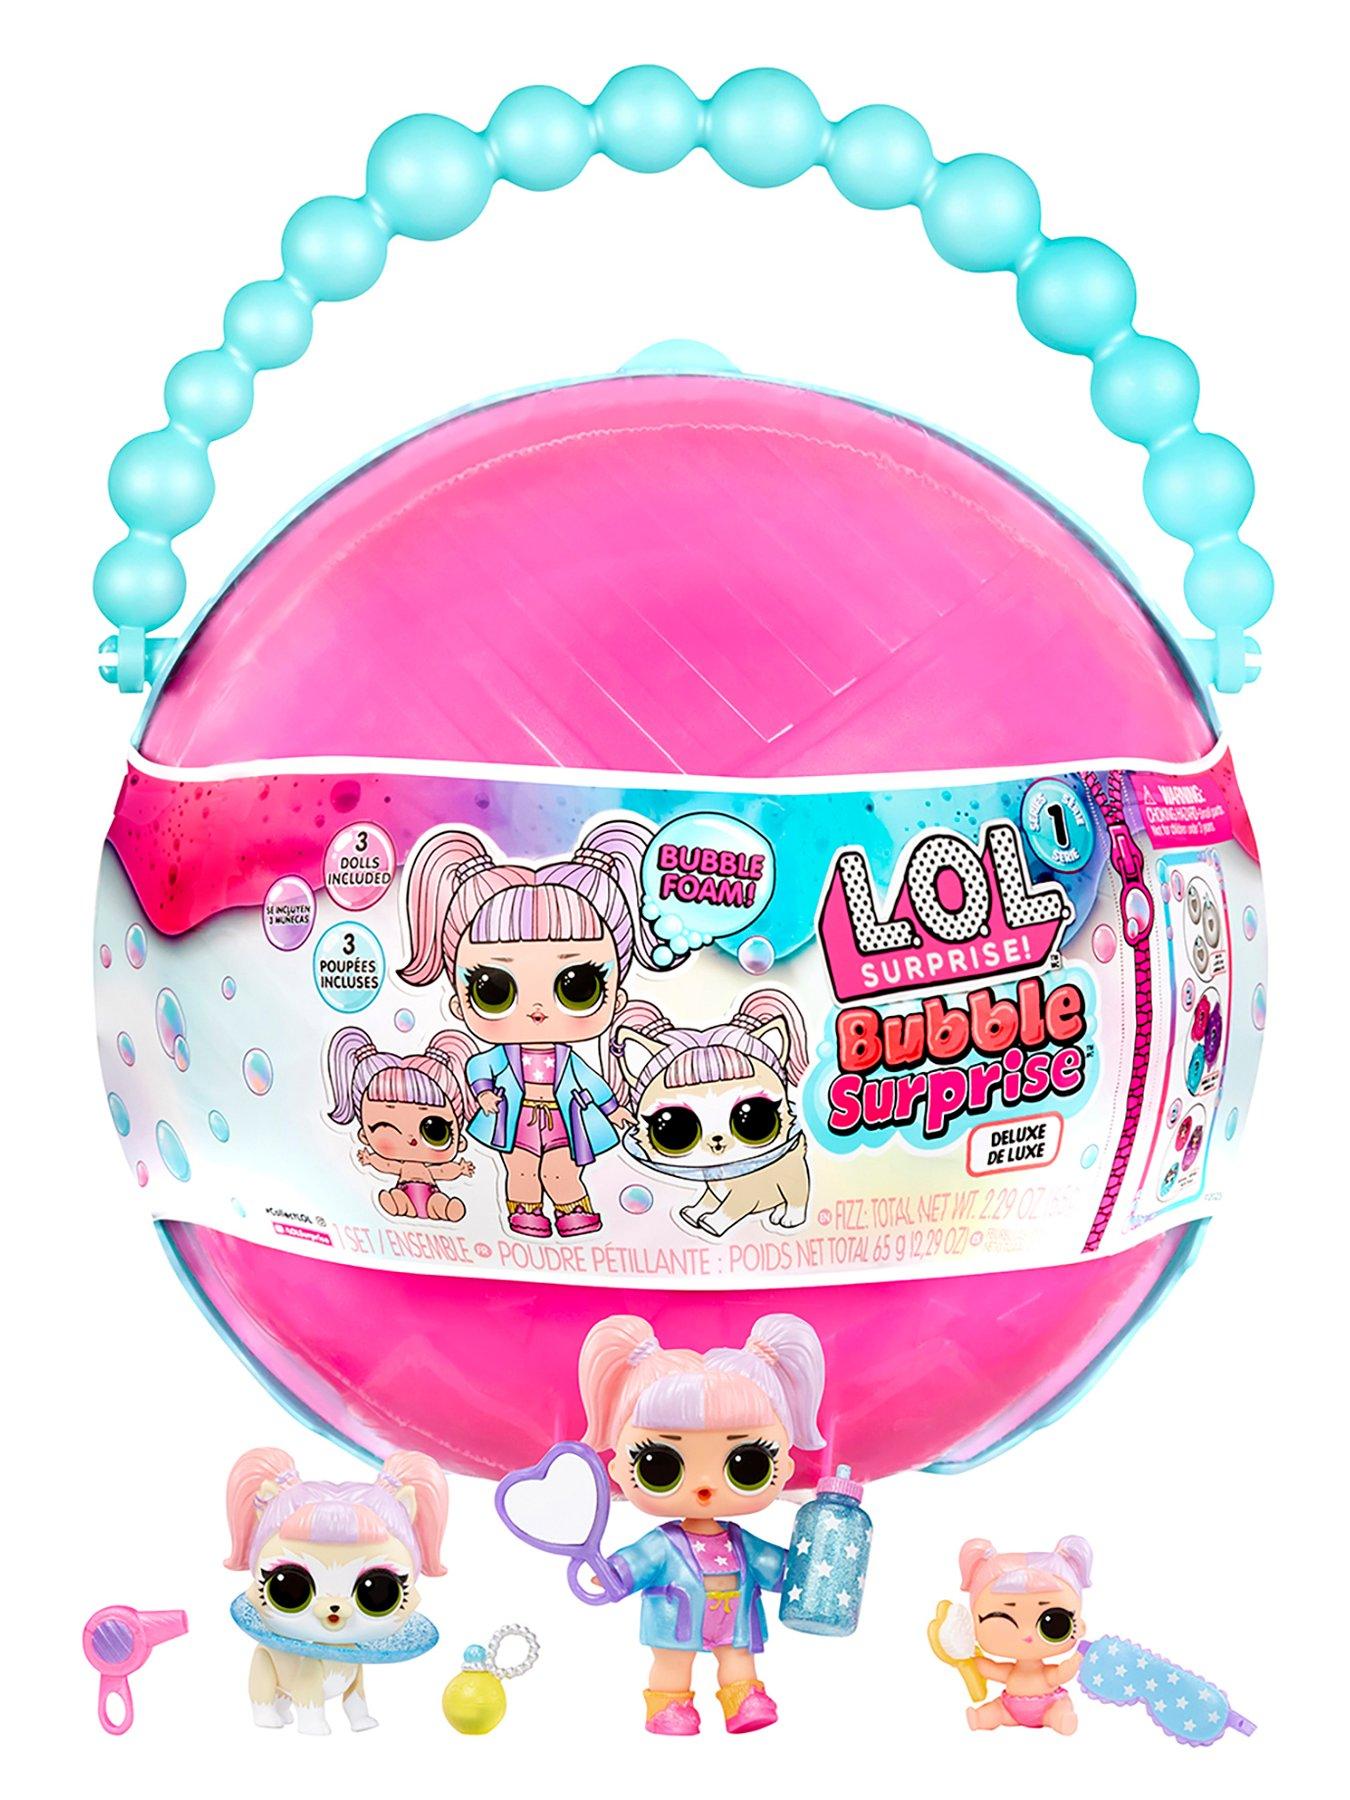 Toy L.O.L. Surprise Tweens Surprise Swap Styling Head Asst, Posters,  Gifts, Merchandise